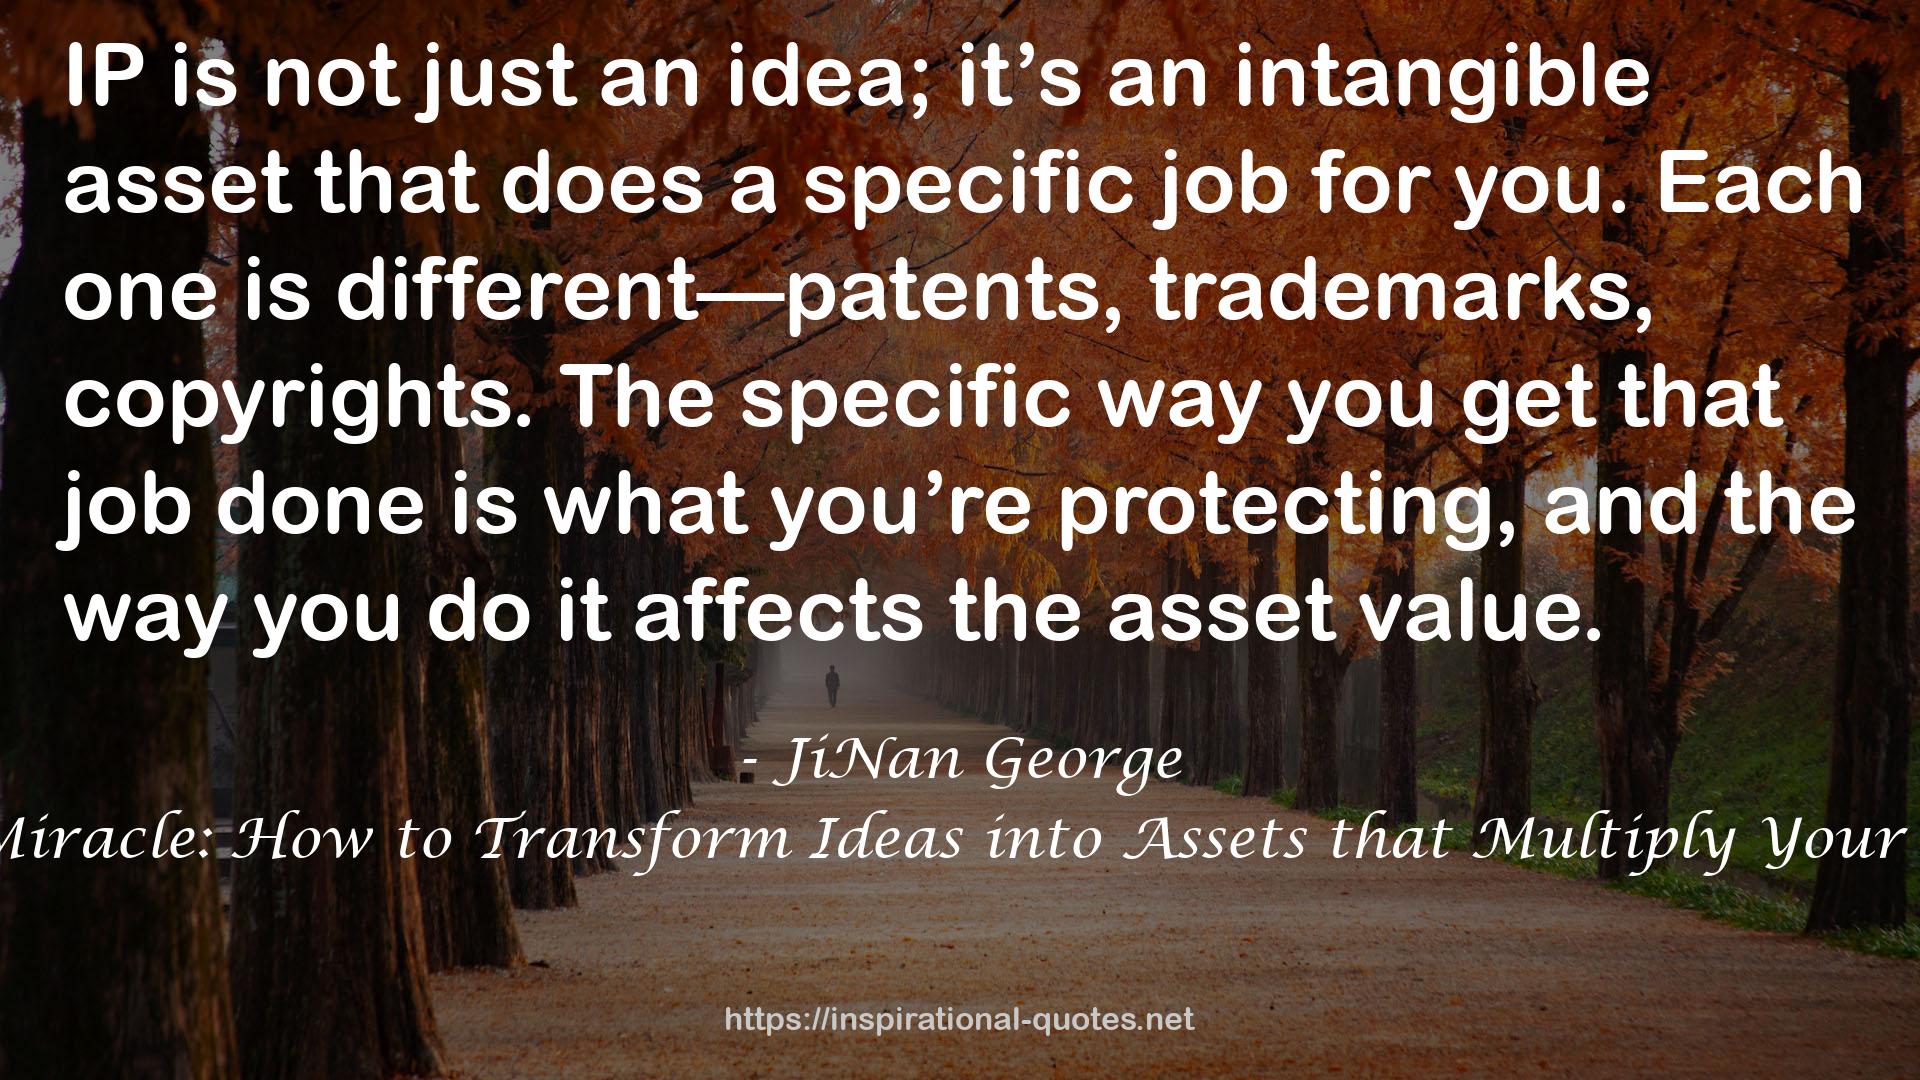 The IP Miracle: How to Transform Ideas into Assets that Multiply Your Business QUOTES